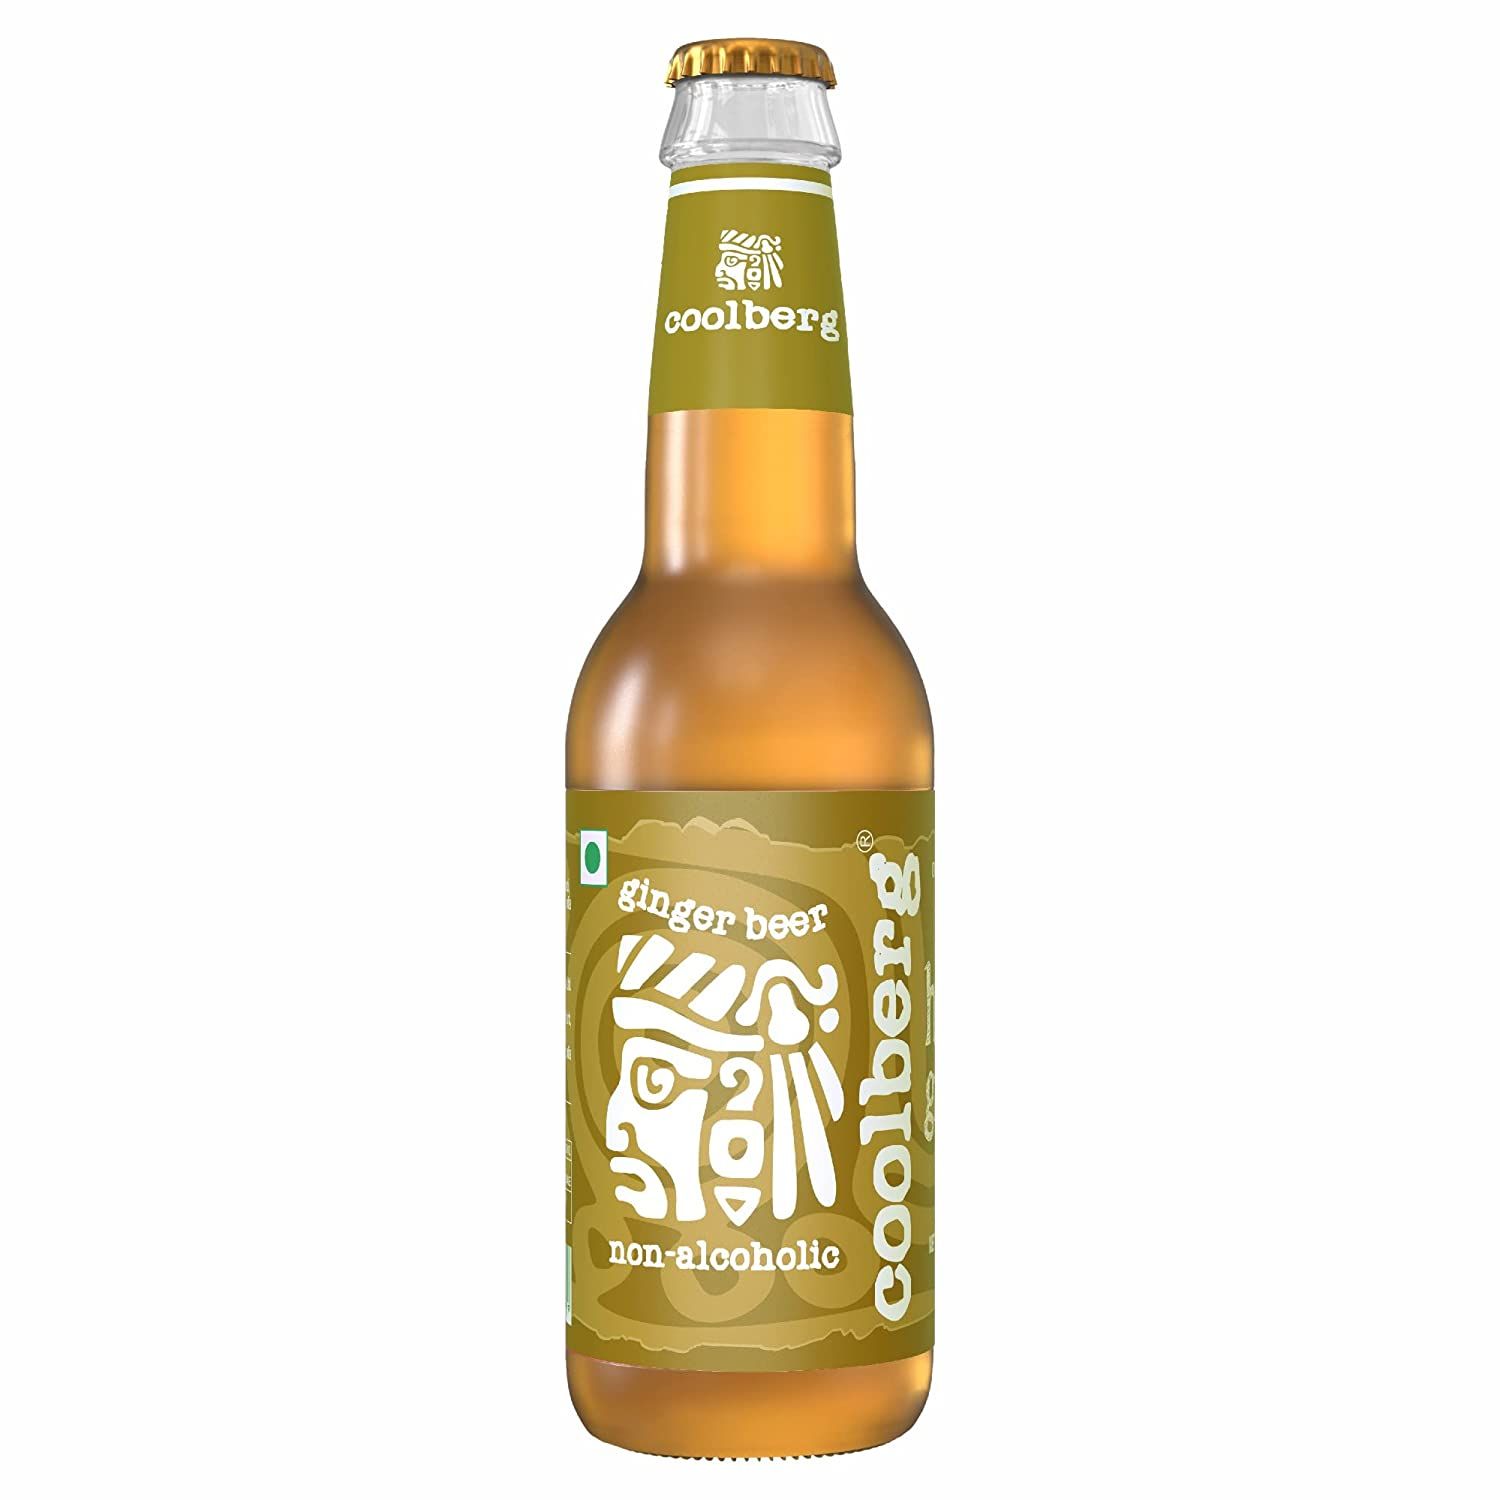 Coolberg Ginger Non-Alcoholic Beer Image